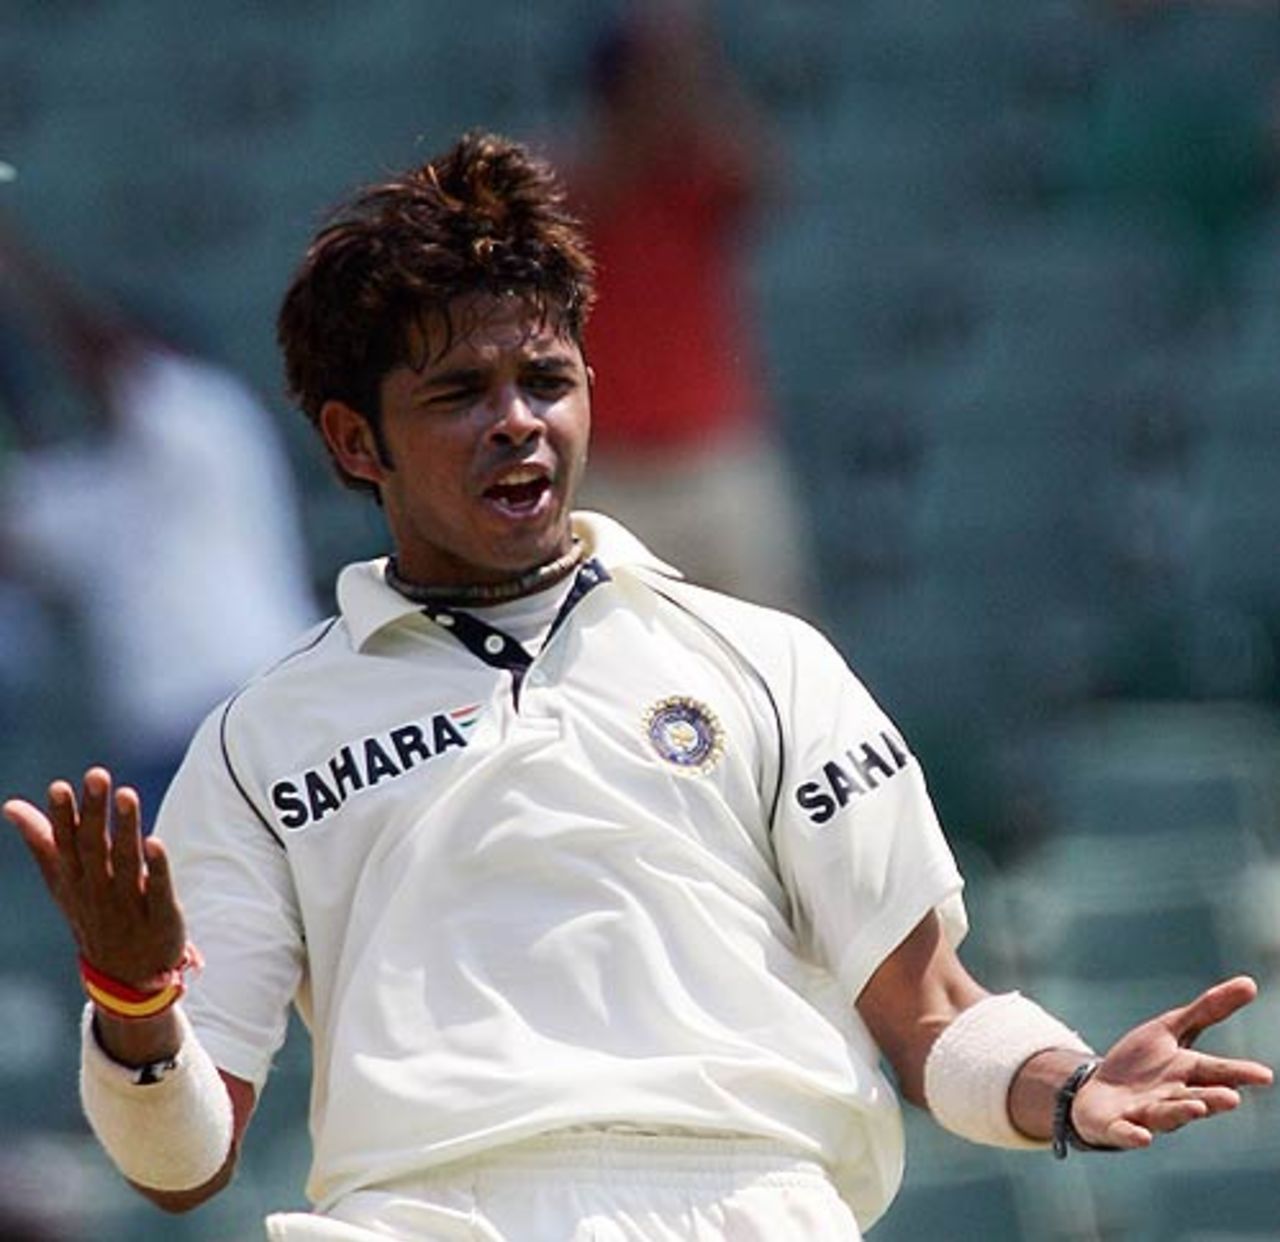 Sreesanth is ecstatic after dismissing another wicket, South Africa v India, 1st Test, Johannesburg, 2nd day, December 16, 2006